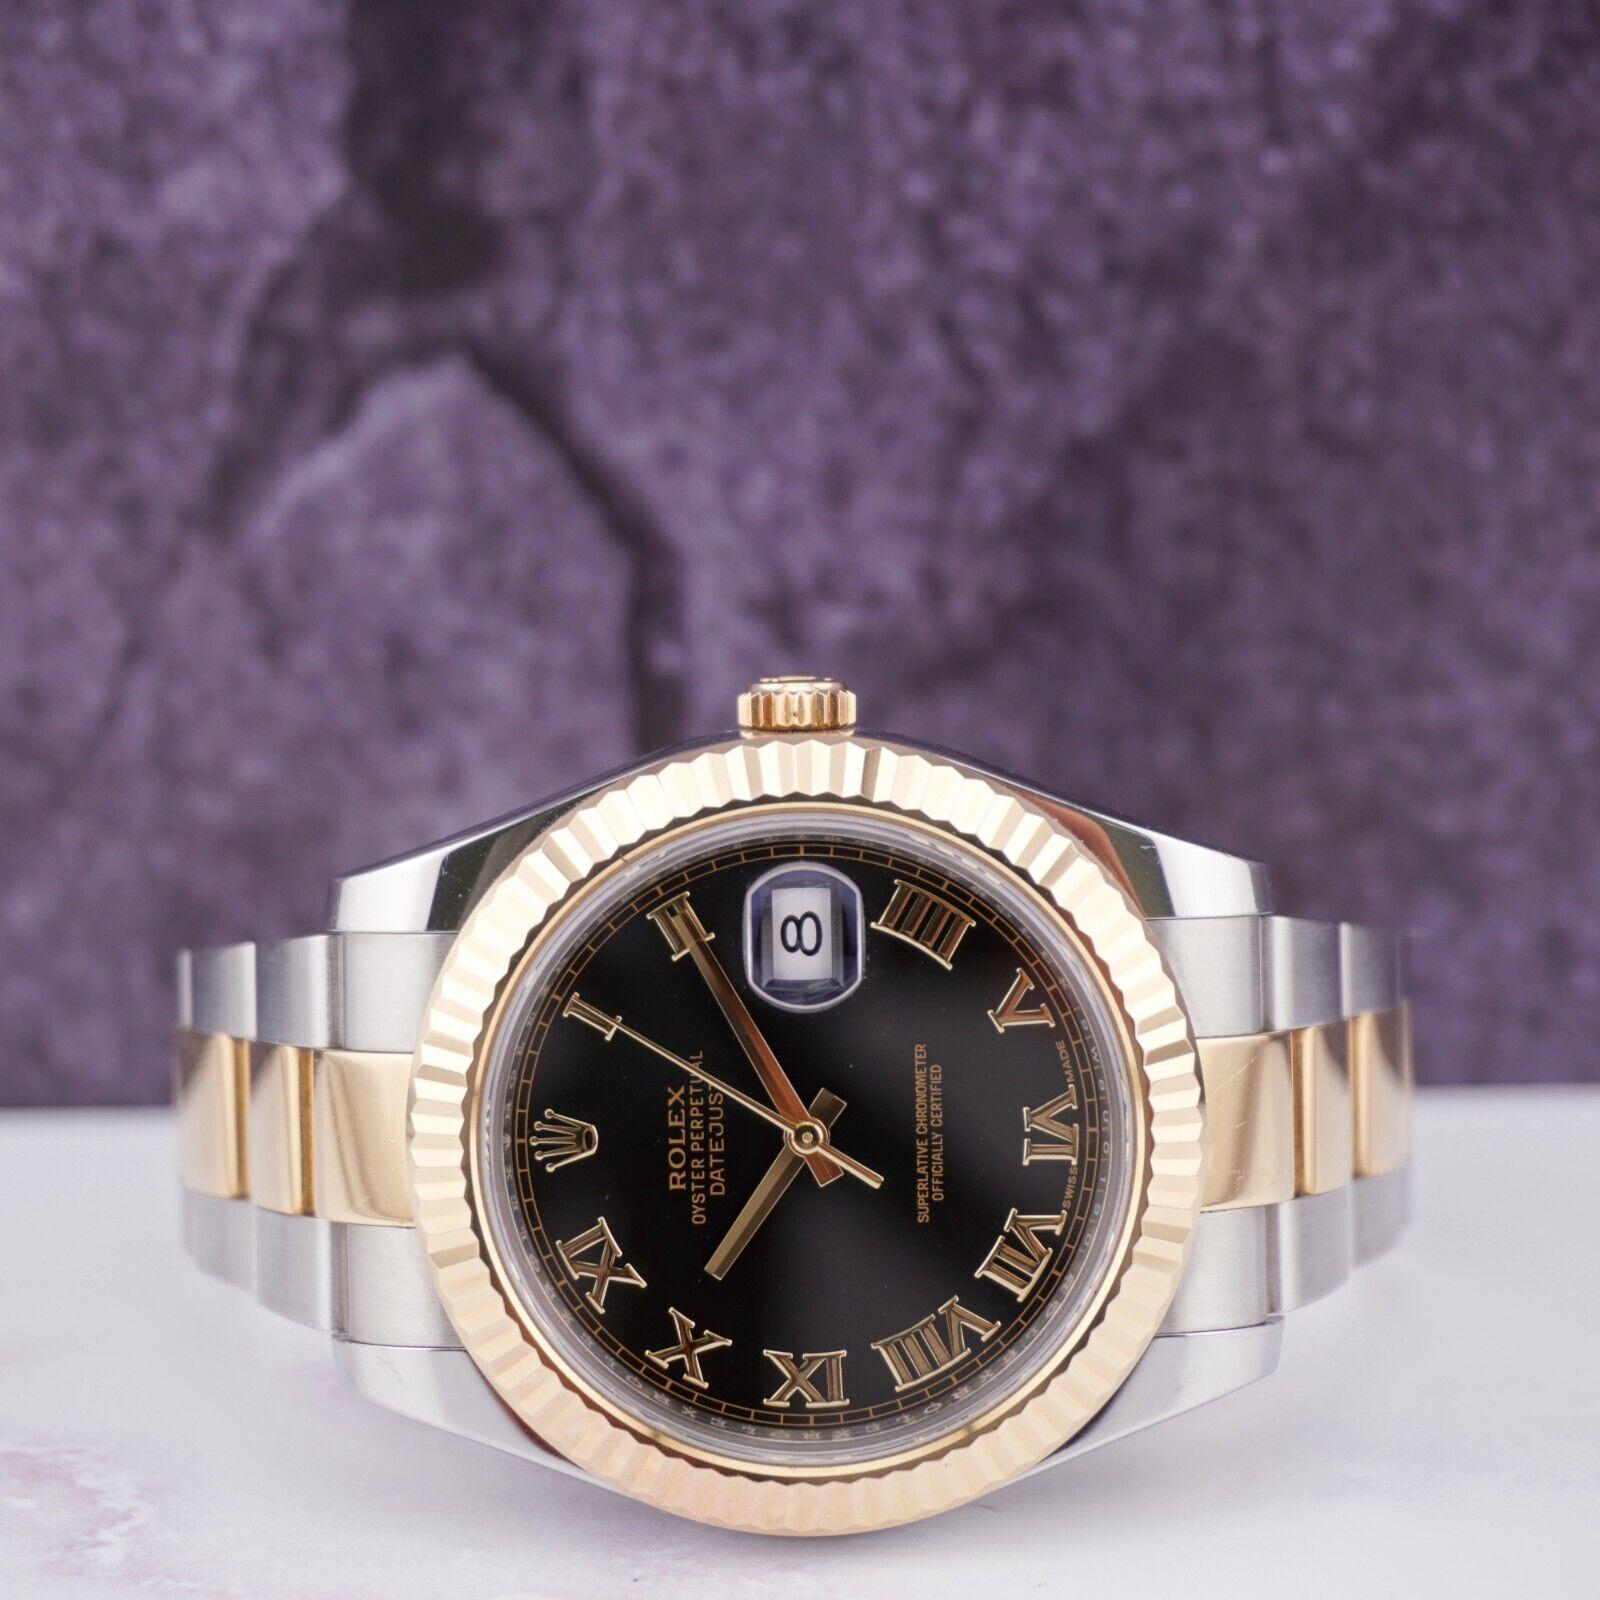 Rolex Datejust II 41mm Watch

Pre-owned w/ Original Box & Card
100% Authentic Authenticity Card
Condition - (Great Condition) - See Pics
Watch Reference - 116333
Model - Datejust ll
Dial Color - Black
Material - 18k Yellow Gold/Stainless Steel
Watch